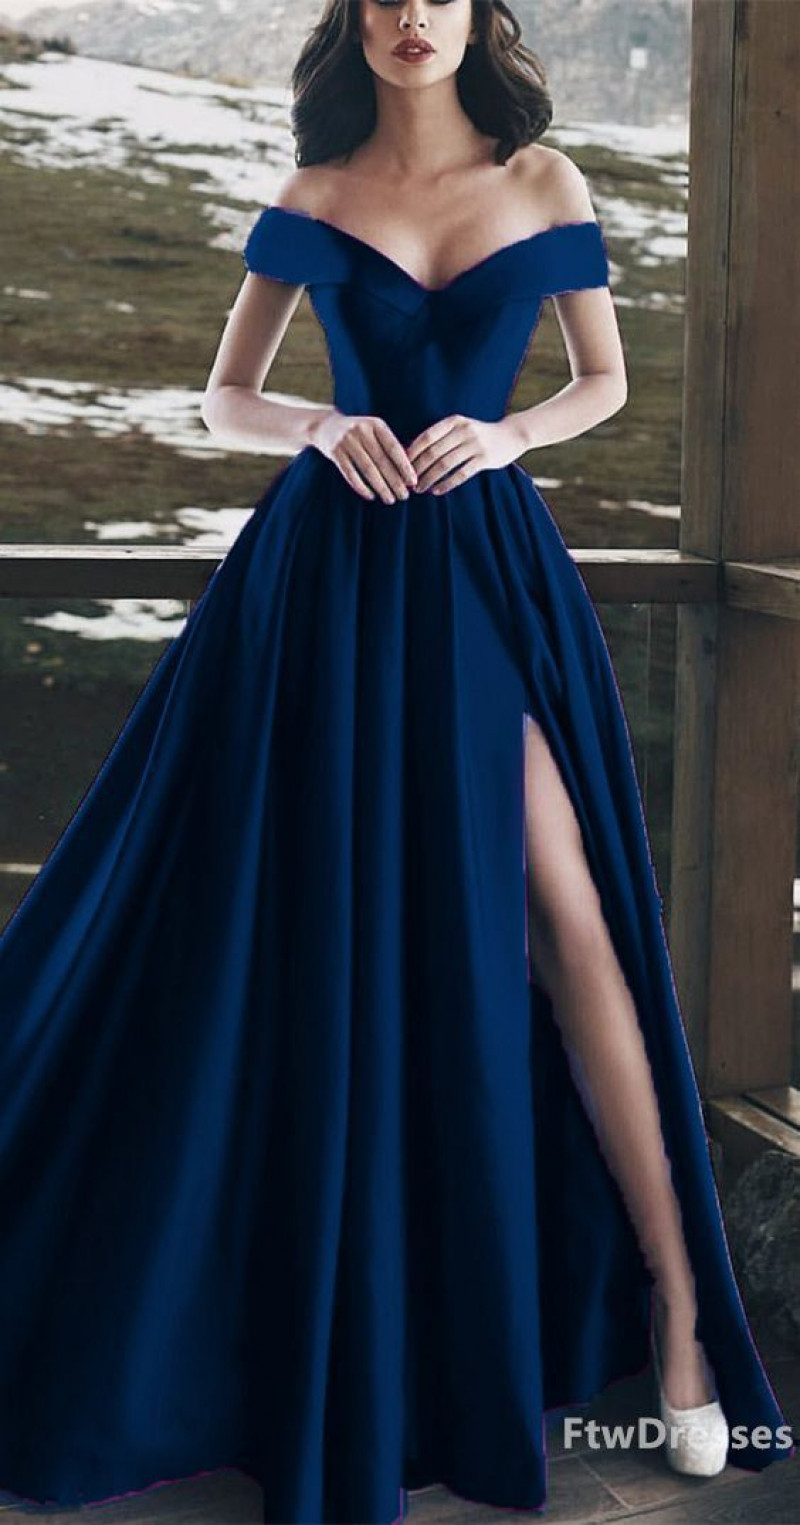 Stunning in Navy: Unveiling the Perfect Prom Ensemble - A Classy Maxi Tutu Skirt Dress!: day dress,  party dress,  prom dresses,  bridal party dress,  evening gown,  ball gown,  navy blue,  party gowns  